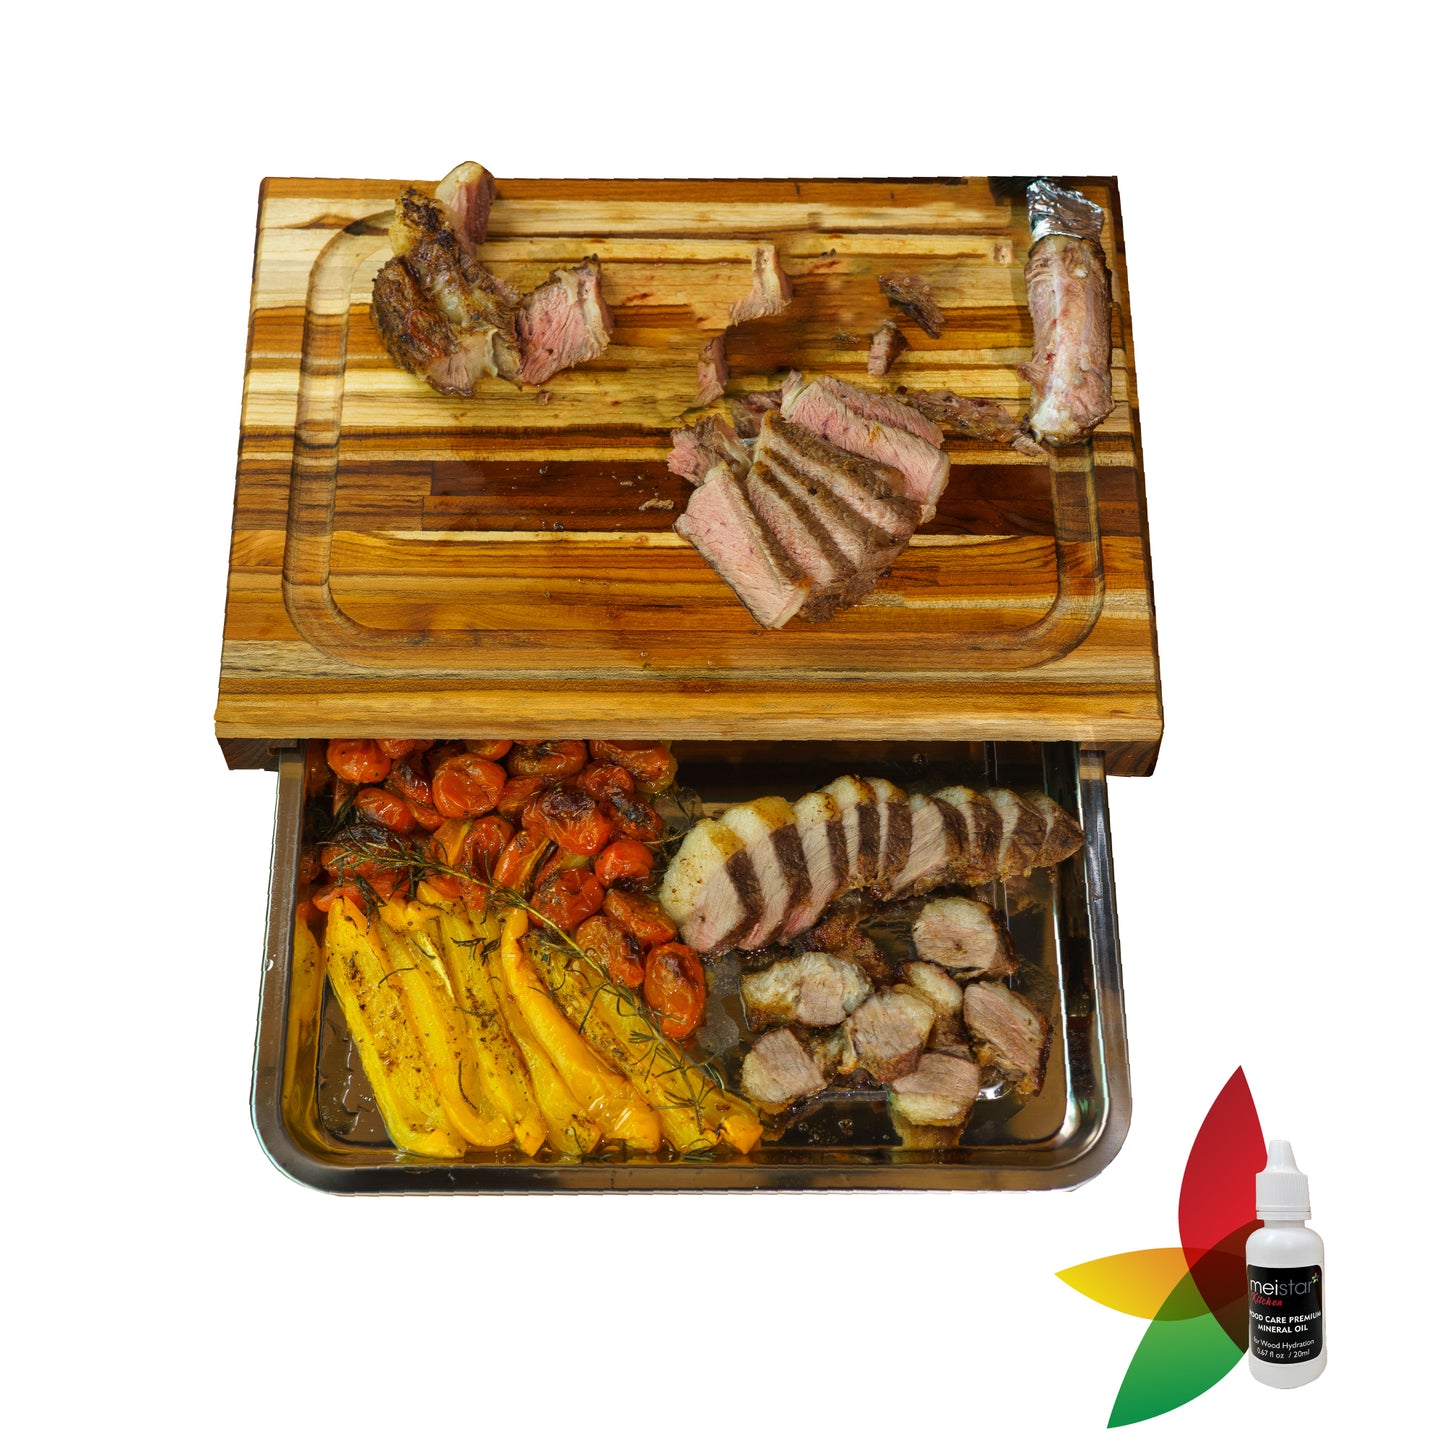 Meistar Master Chef Large End Grain Teak Wood Cutting Board. Thick Butcher Block for Kitchen, Brisket and BBQ with Stainless Steel Tray and Juice Groove.